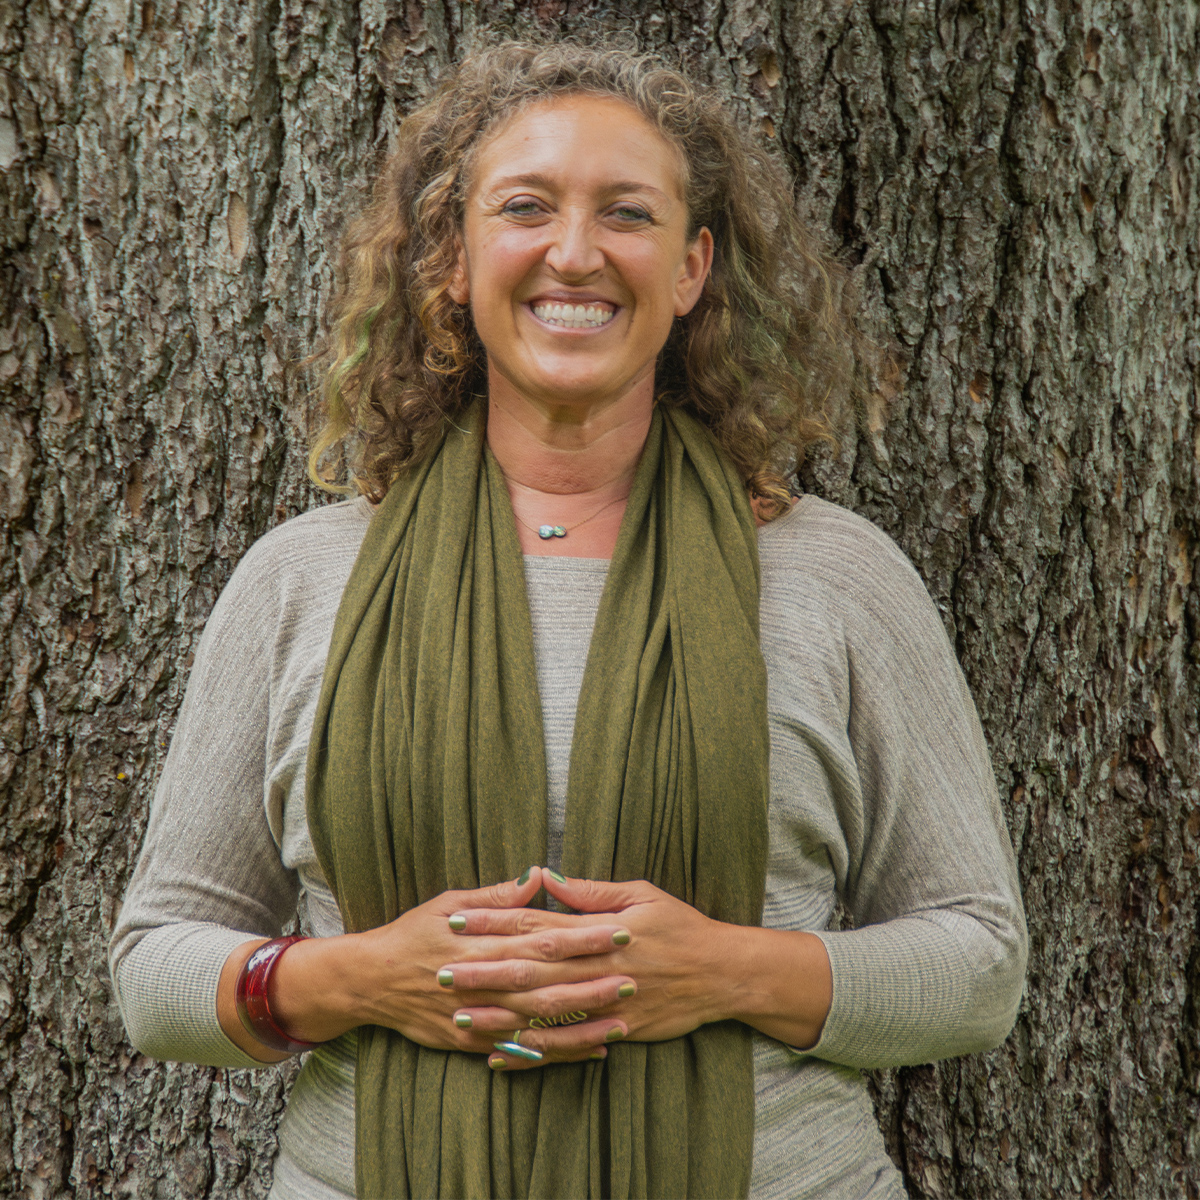 Zara Zimbardo color portrait. Zara is a woman with light colored curly hair. She is smiling, standing in front of a wide-trunk of a tree. She has her hands laced and rested on her stomach.